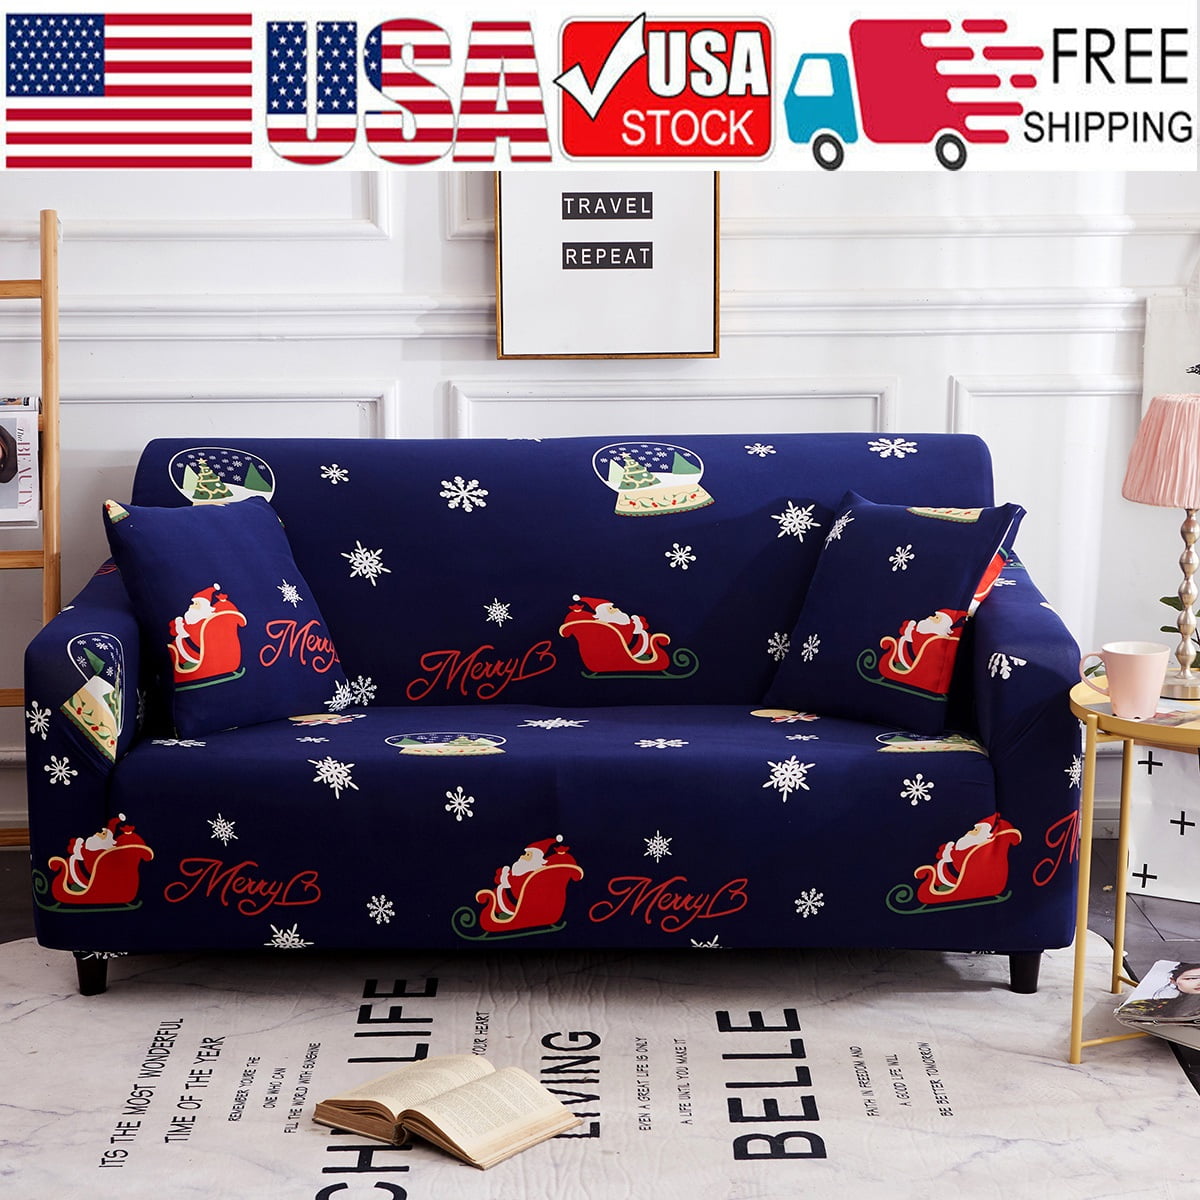 1234Seater Stretch Sofa Covers Couch Cover Elastic Slipcover Protector Chritmas 